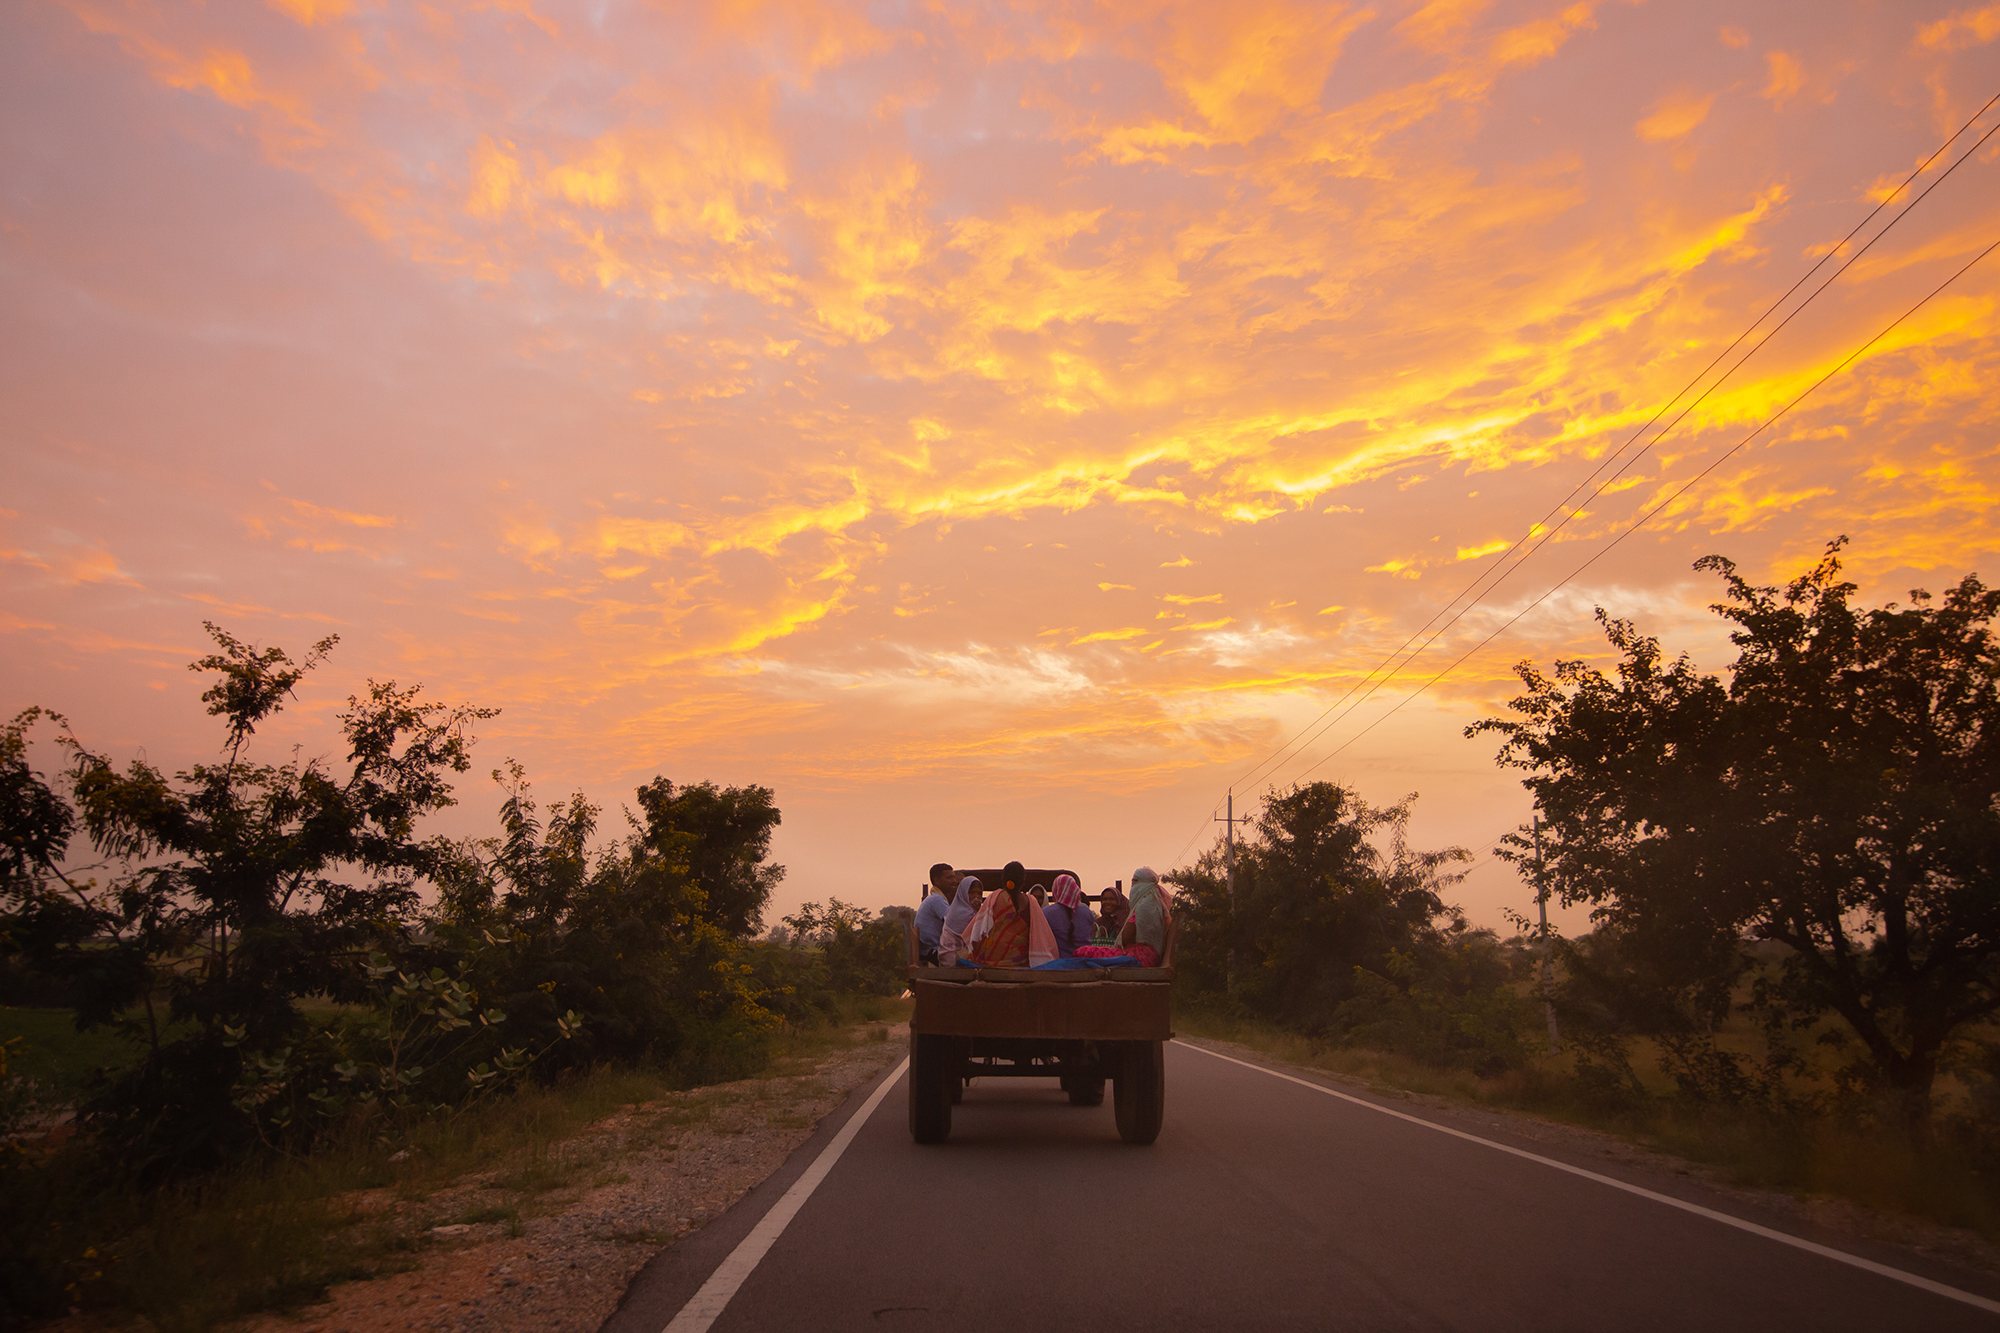 People return home in a tractor in Pavagada. While some have benefitted from the job openings at the solar park, others point at the lack of diversified jobs and training for local communities. Photo by Abhishek N. Chinnaappa/Mongabay.